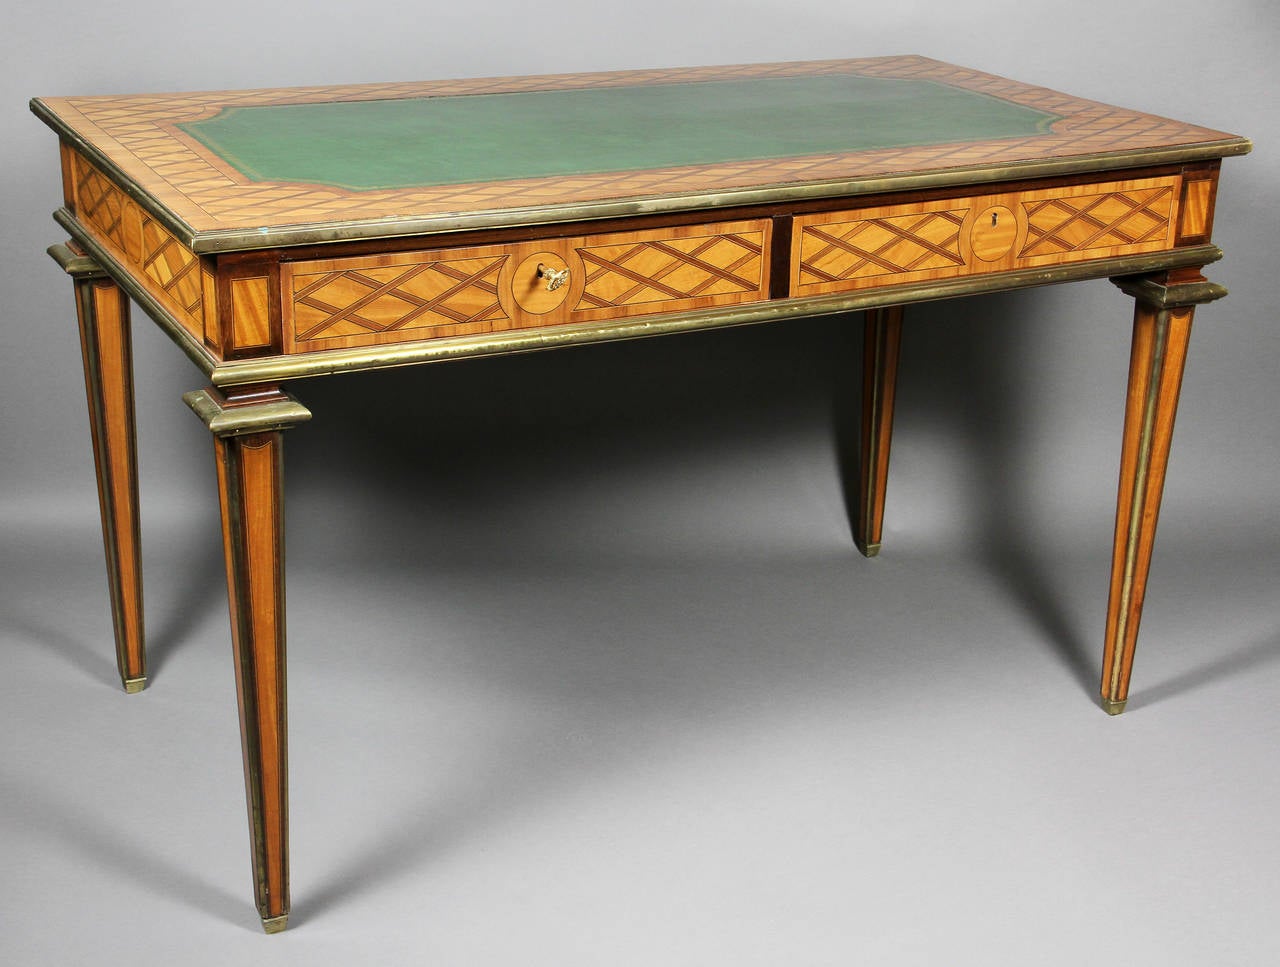 Rectangular top with trellis pattern inlay and inset tooled green leather top with brass edge over two drawers raised on square tapered legs with brass capitols and edging. In the French taste.